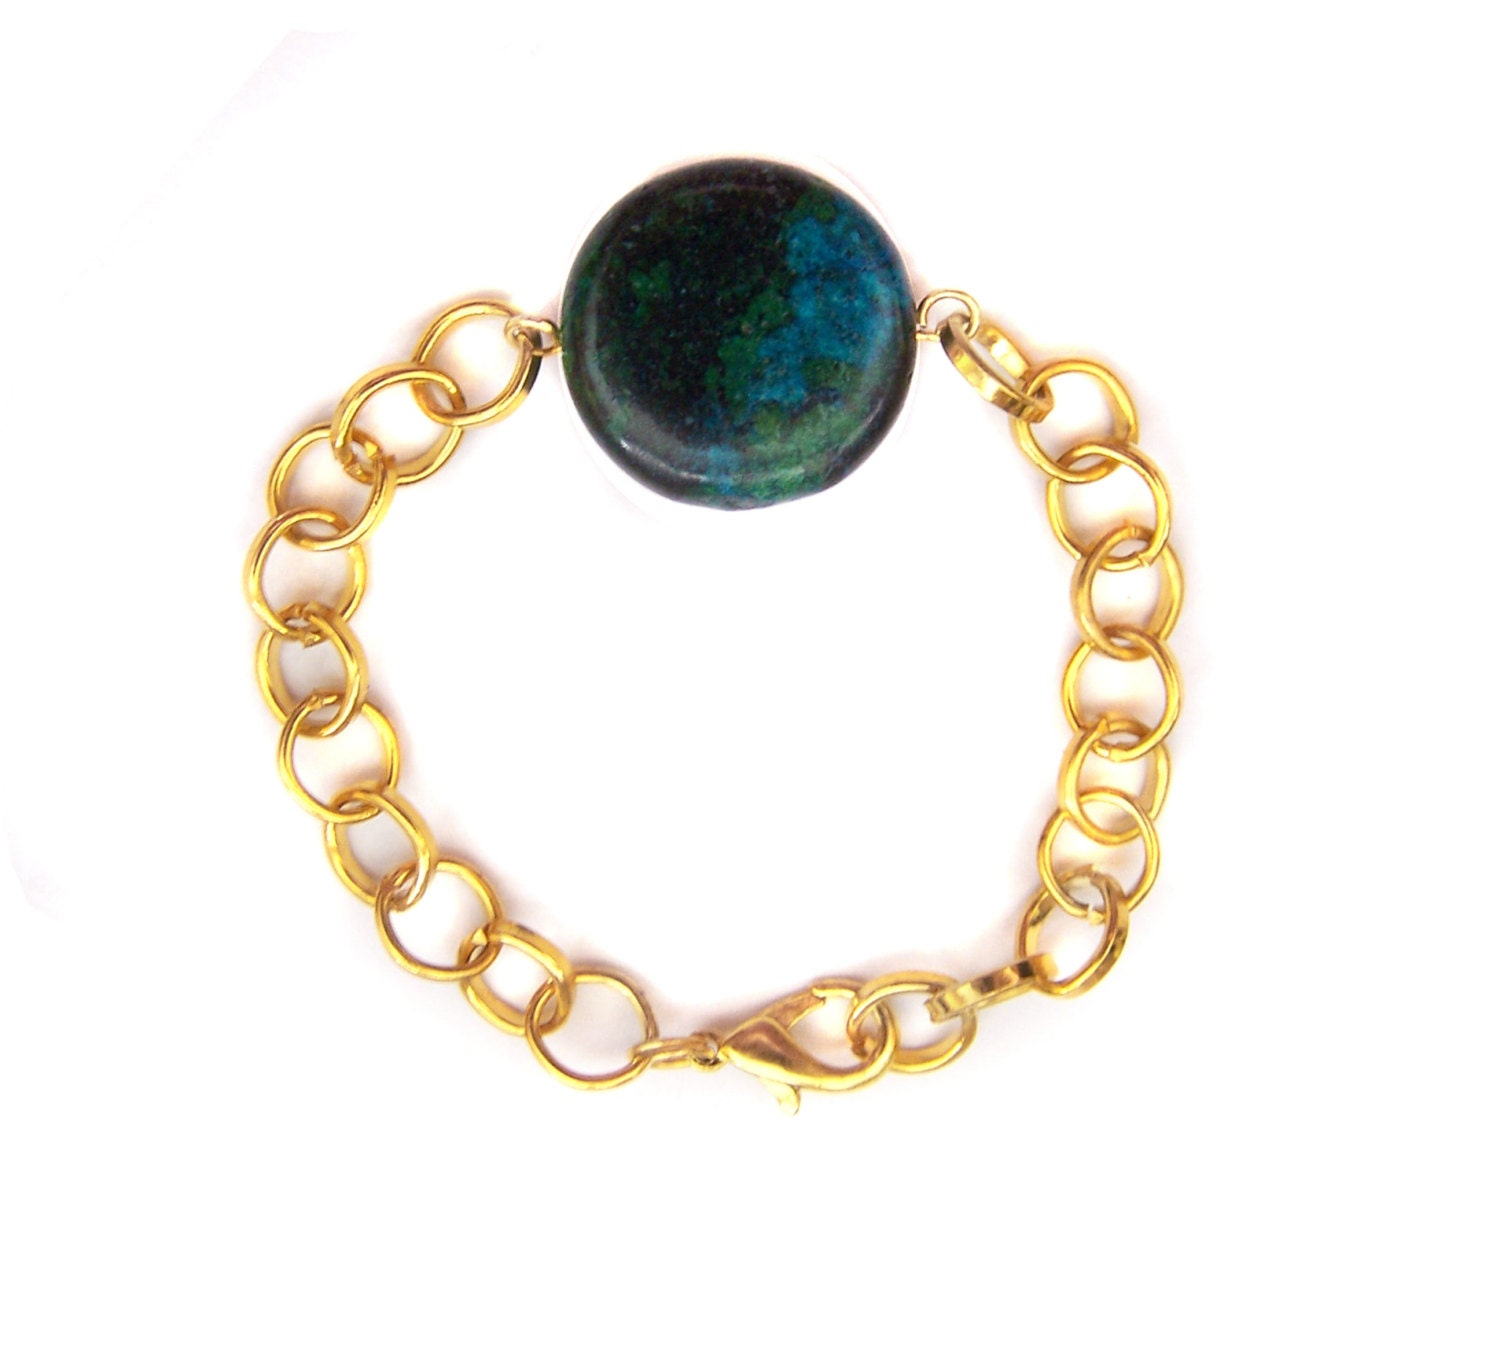 Gold Chain Bracelet with Big Natural Chrysocolla Stone, Chunky Gold Link Chain Gemstone Bracelet - IskraCreations